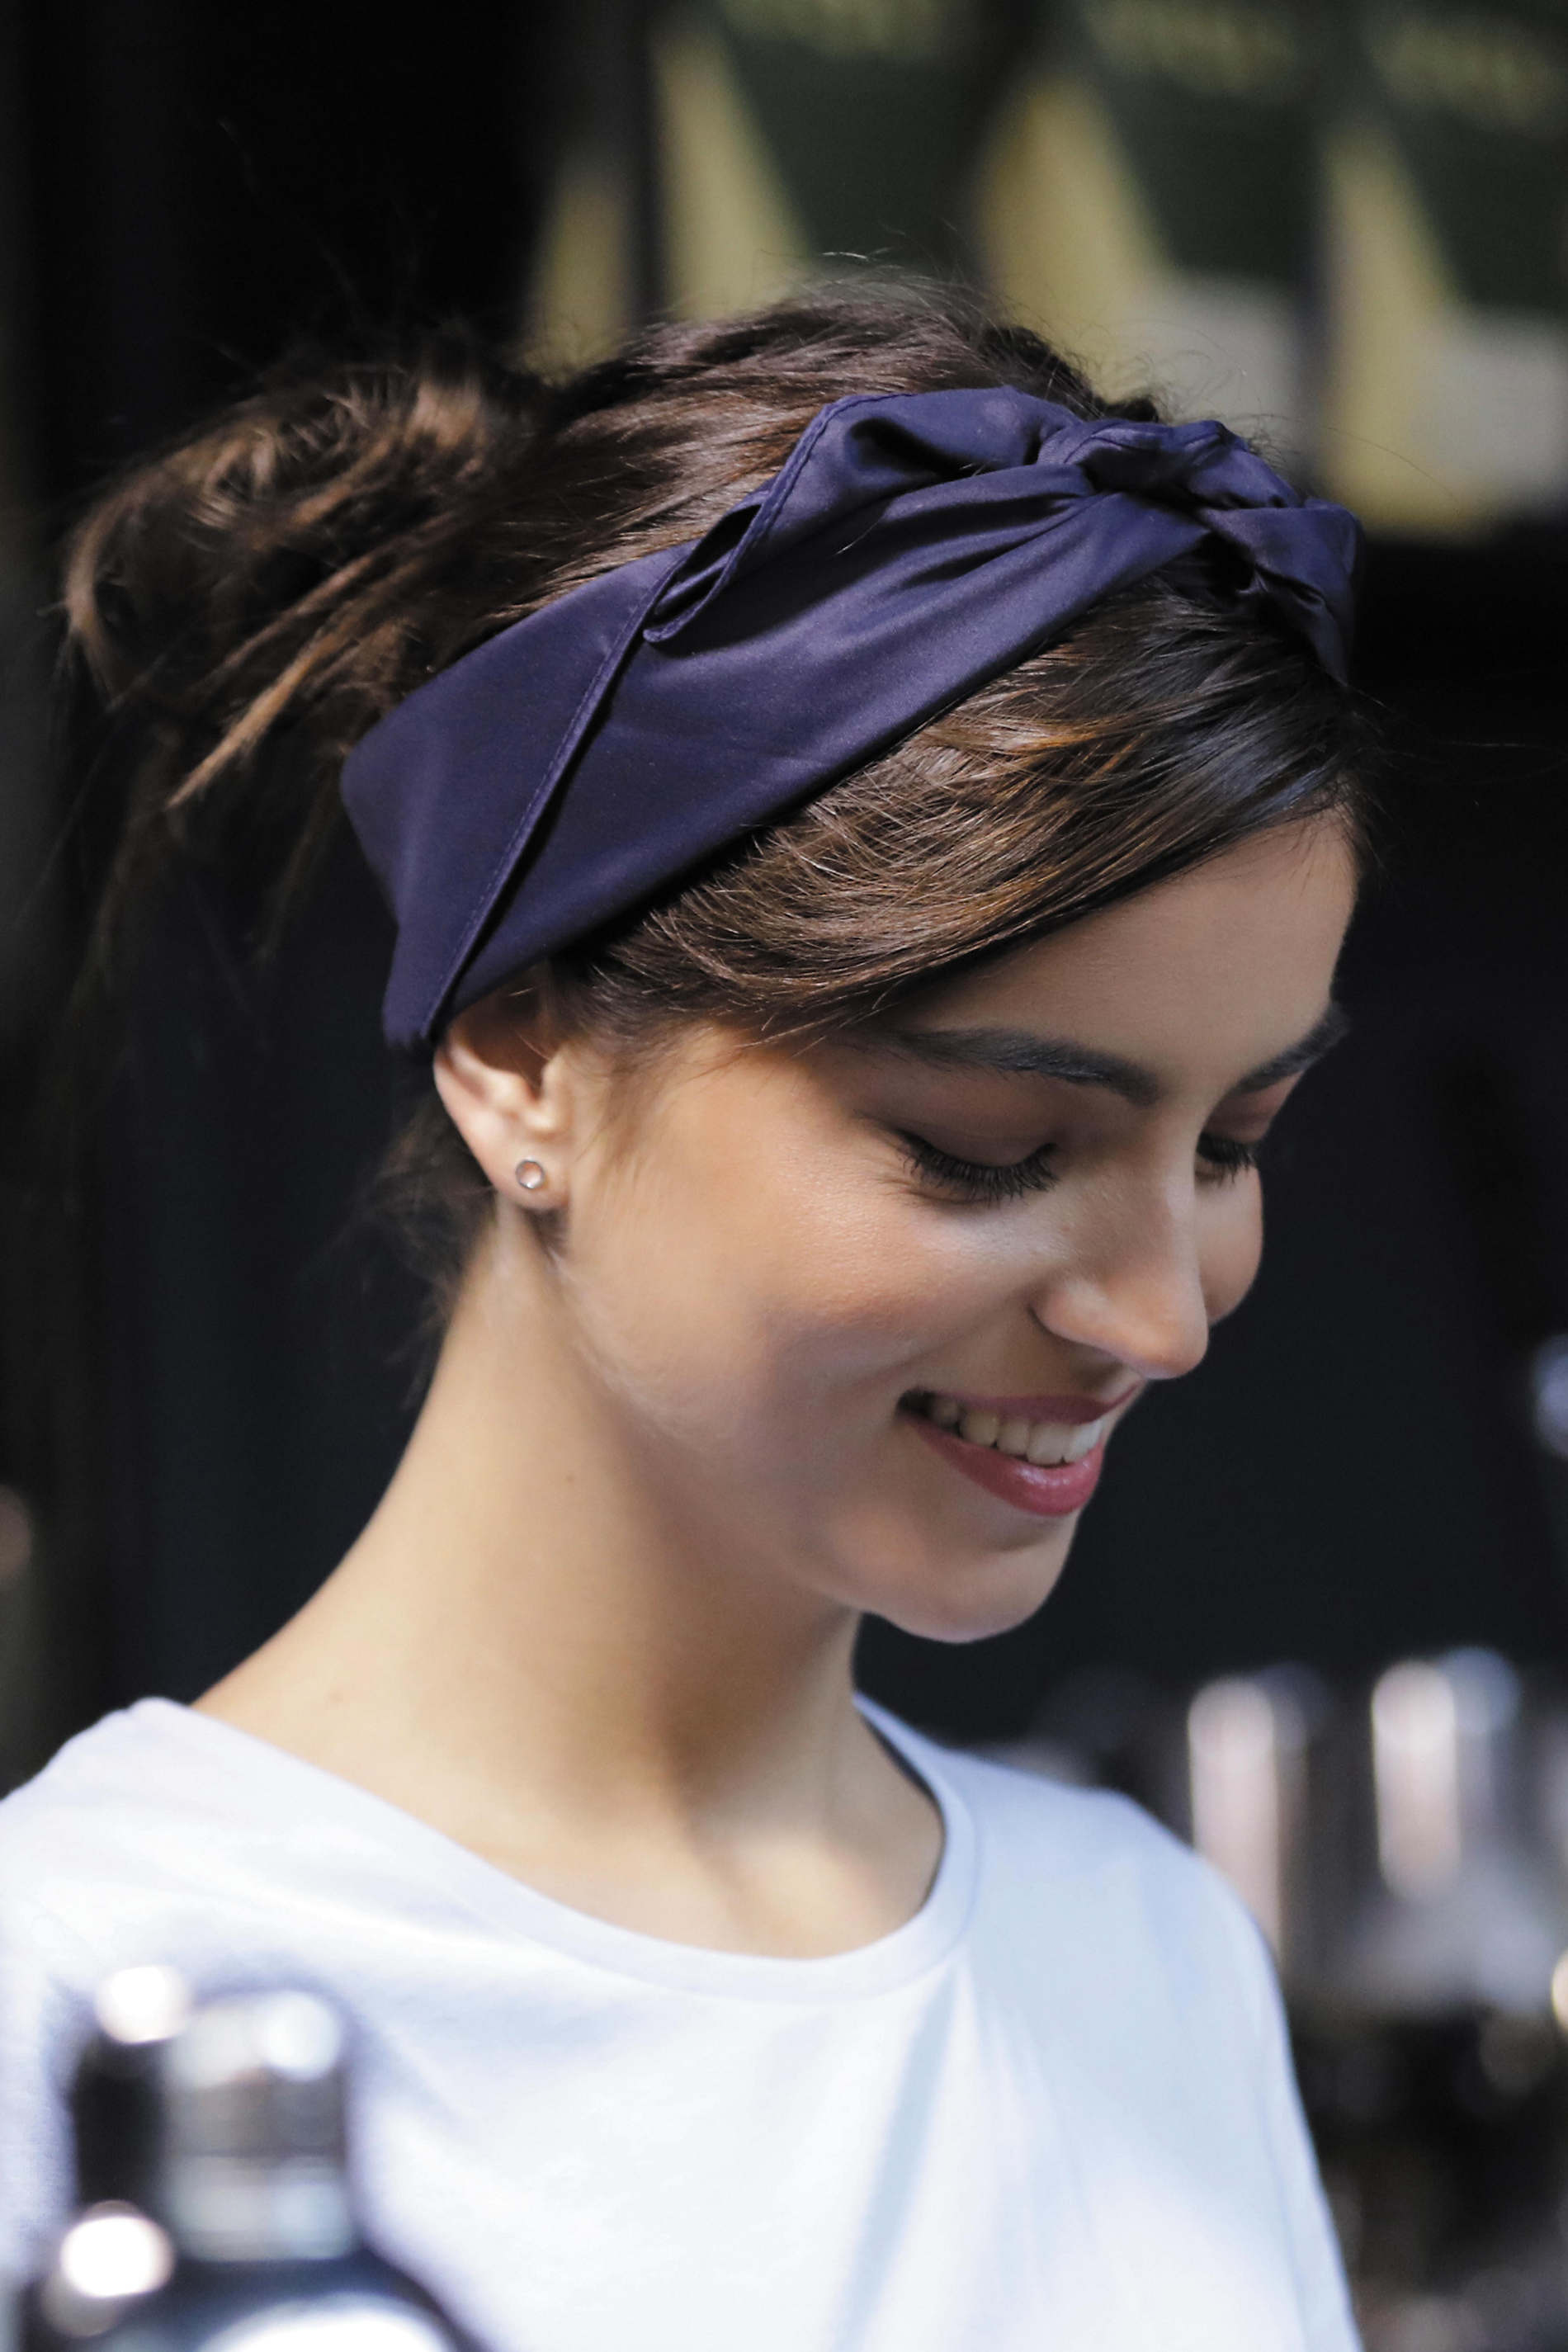 FOULARD<br/><p>A timeless accessory of women’s wardrobe, the satin headscarf is a must-have that can be worn around the neck, as a belt or tied up in your hair.</p> NEOBLU TARA